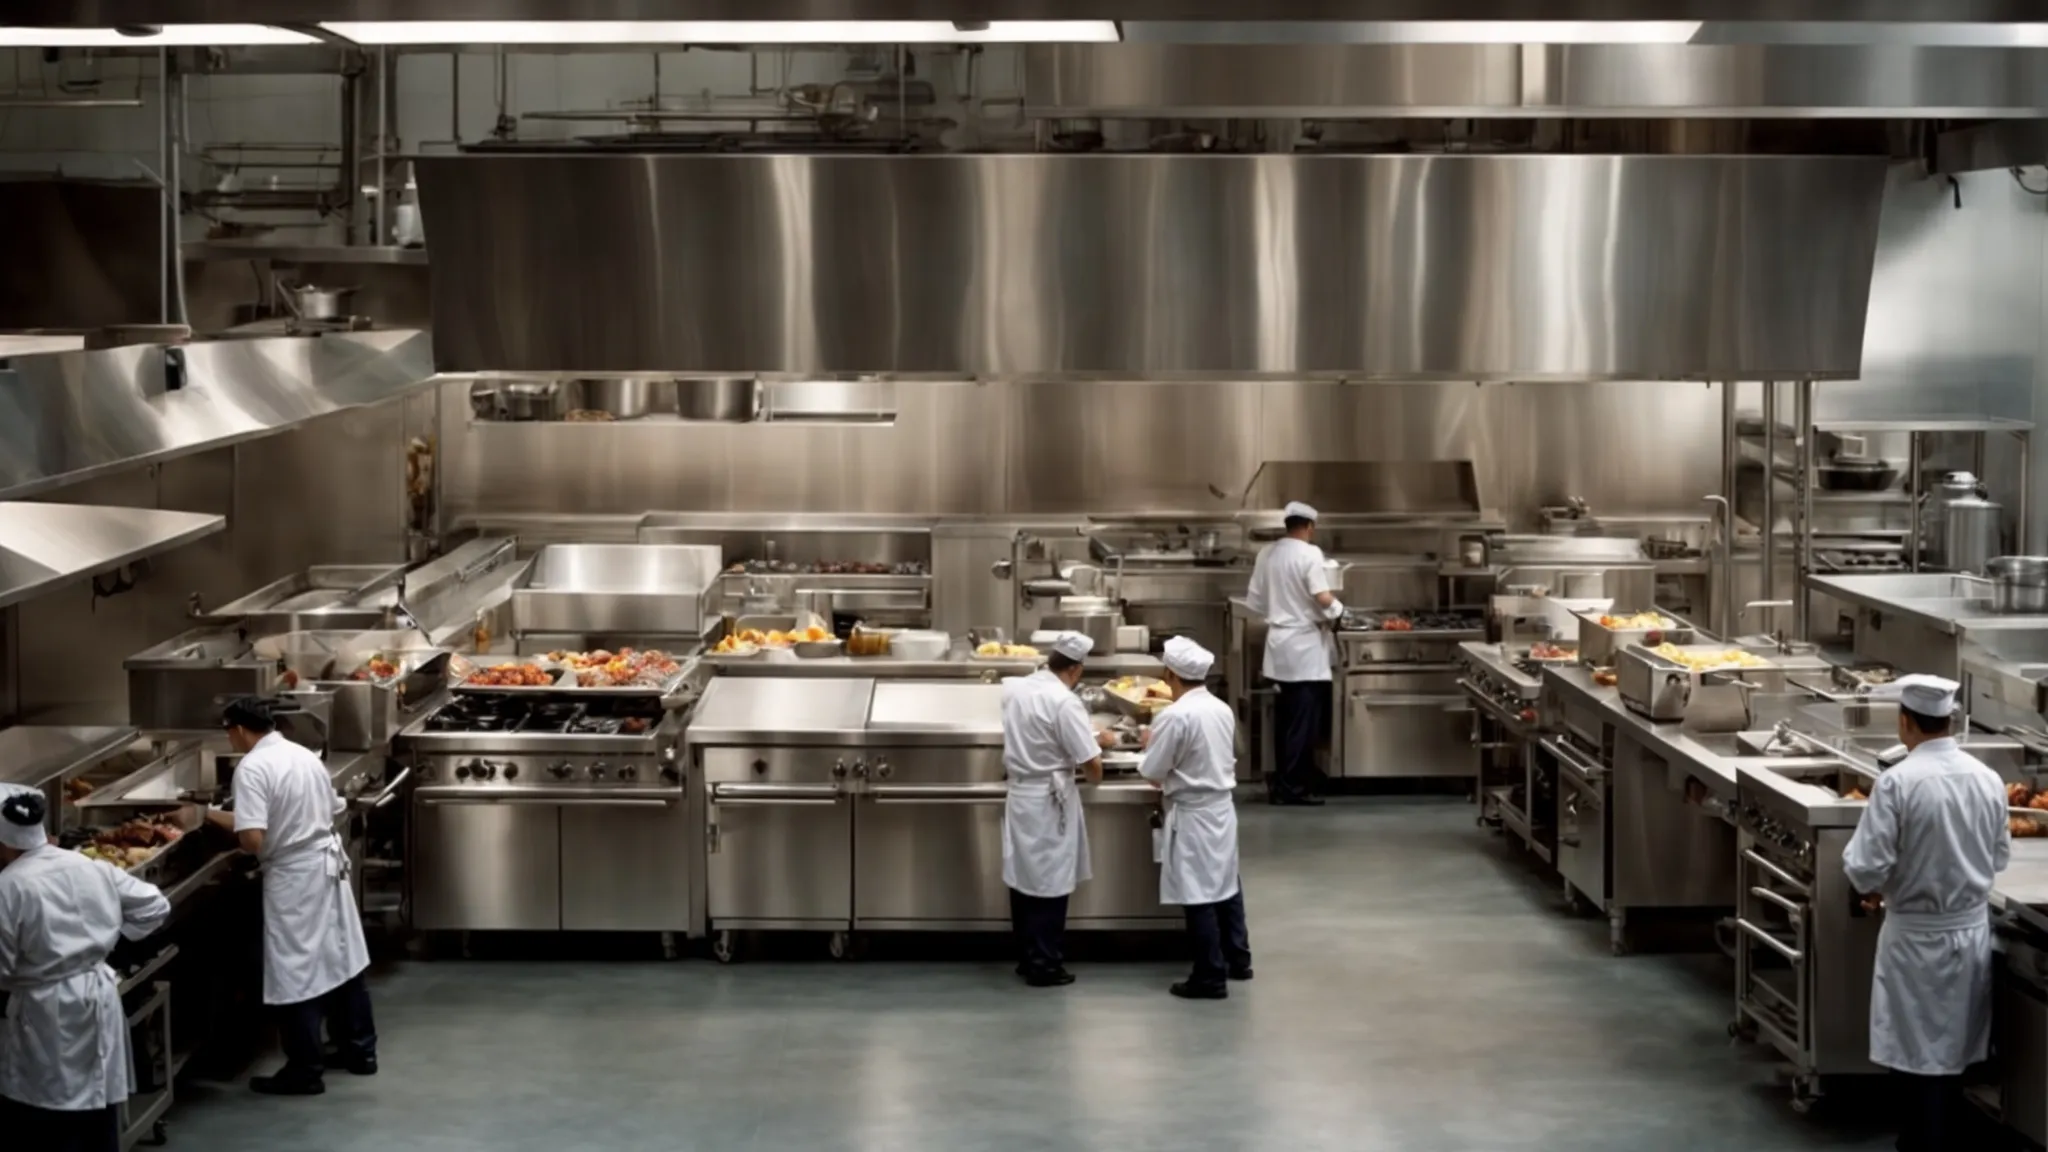 an overhead view of a bustling commercial kitchen, with chefs at work near large stoves and a clearly visible, extensive Toronto Hood Cleaning exhaust system overhead.